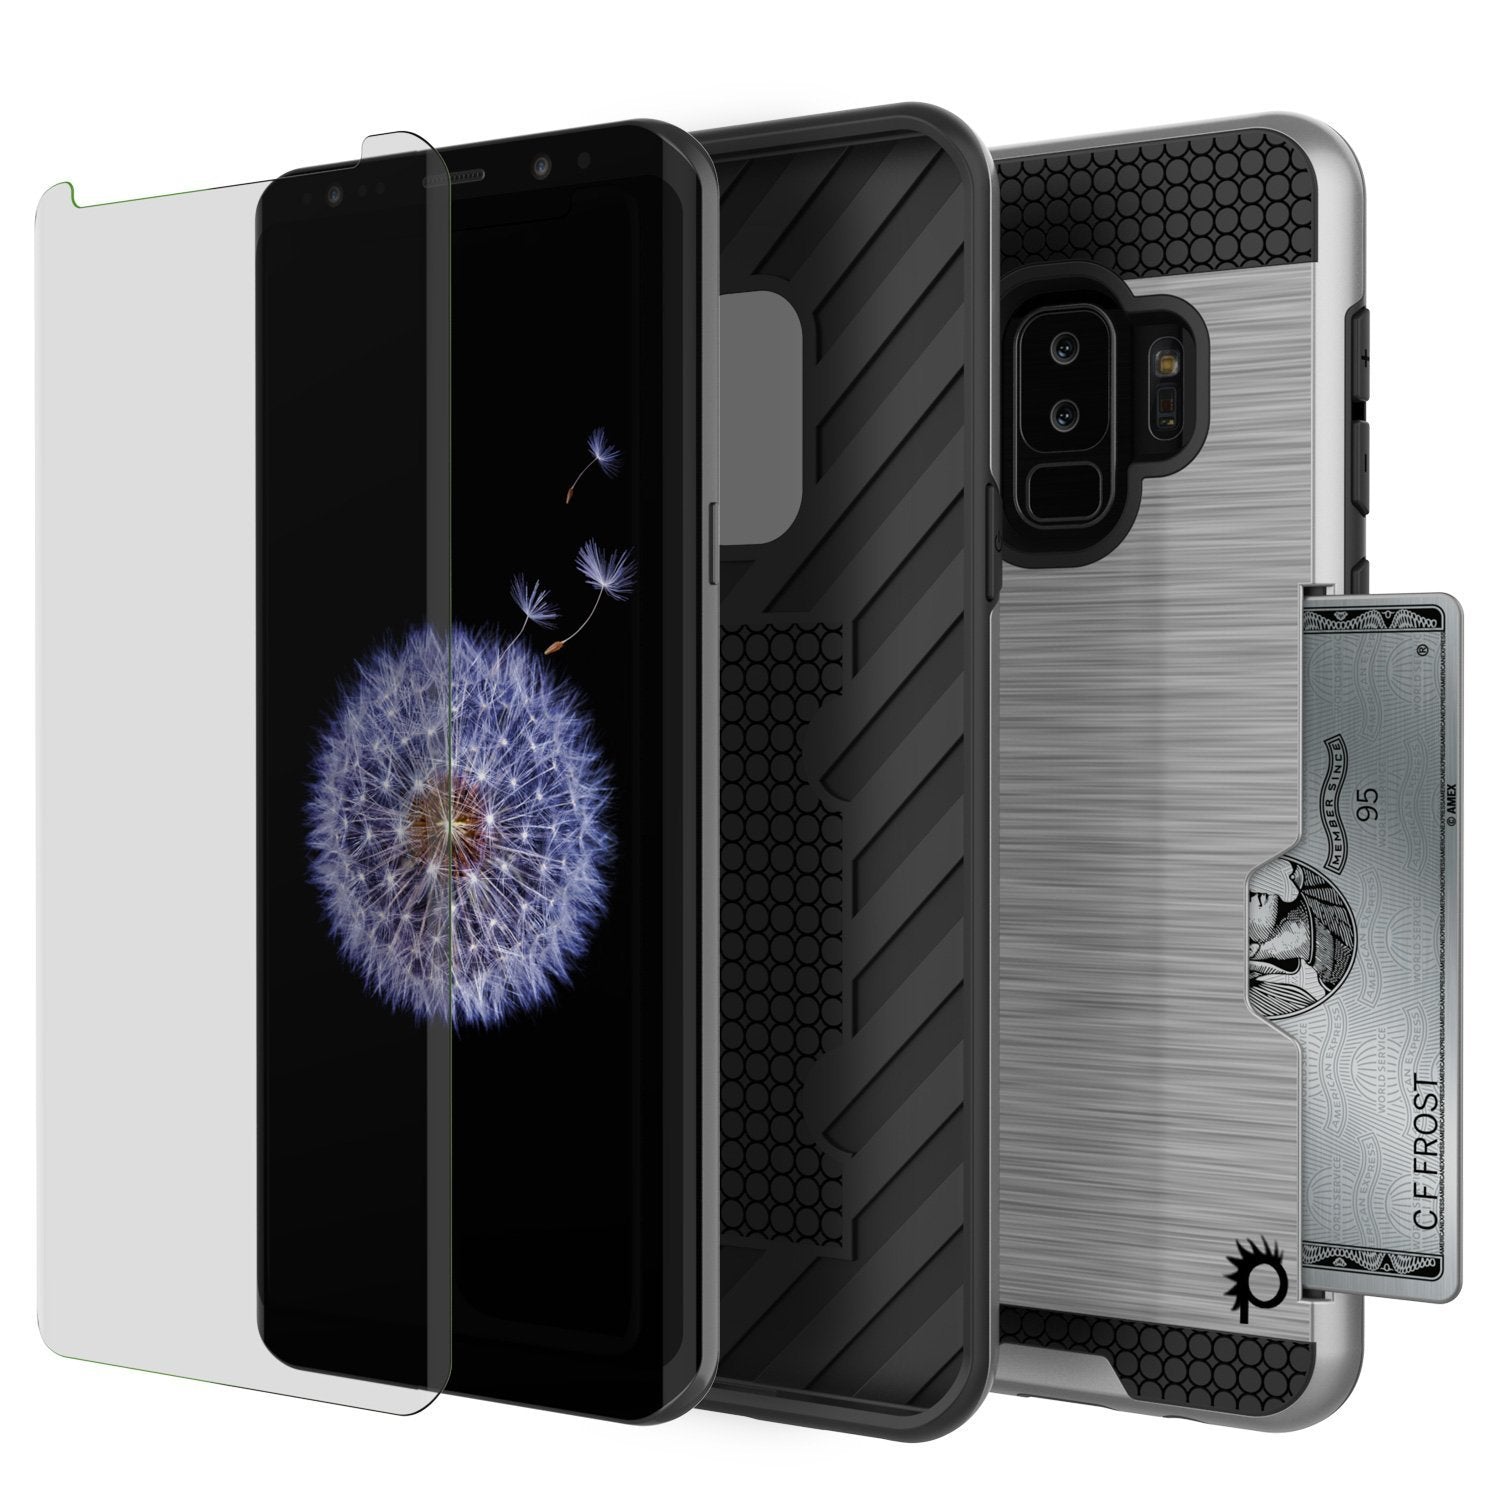 Galaxy S9 Plus Case, PUNKcase [SLOT Series] [Slim Fit] Dual-Layer Armor Cover w/Integrated Anti-Shock System, Credit Card Slot [Silver]